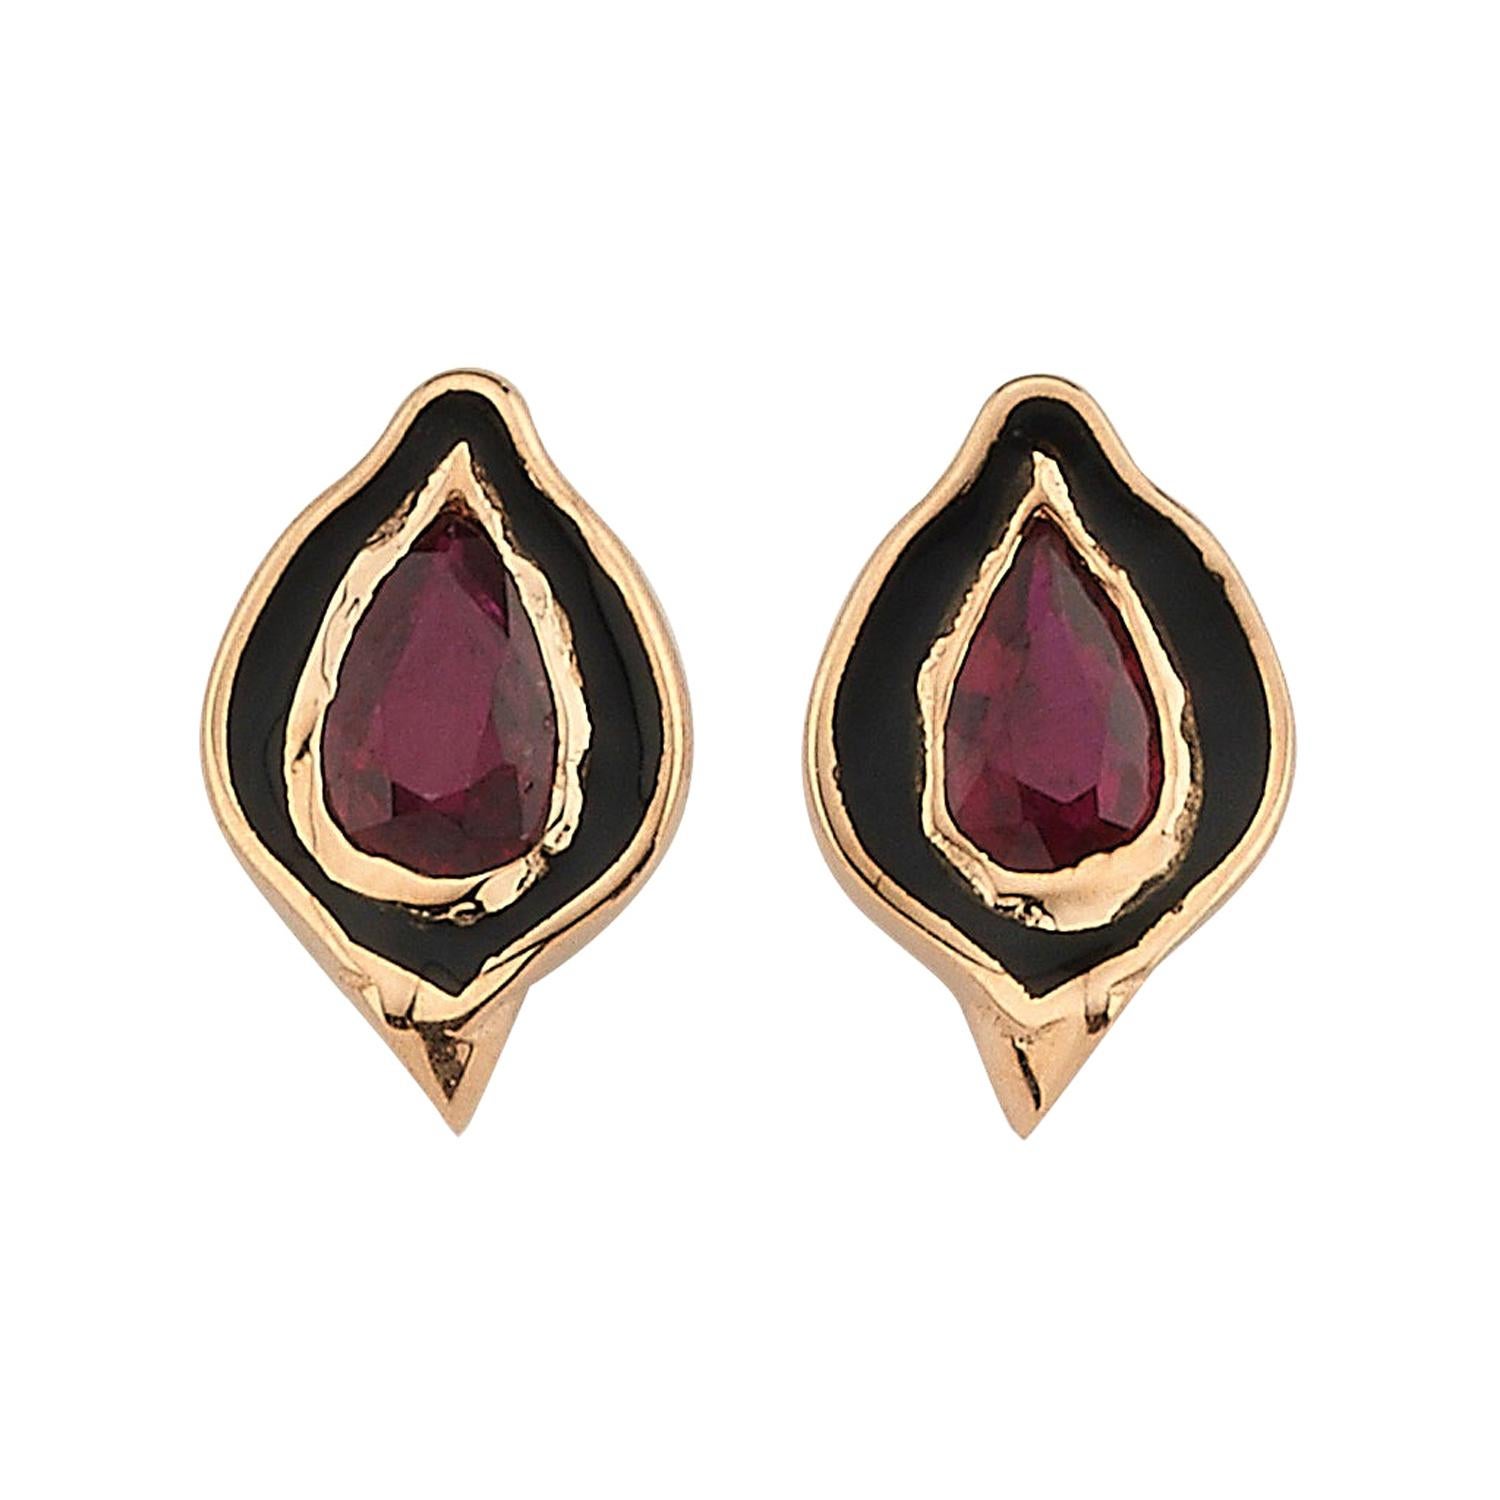 Baby Dragon Ruby Stud Earrings in 14 Karat Rose Gold with Ruby